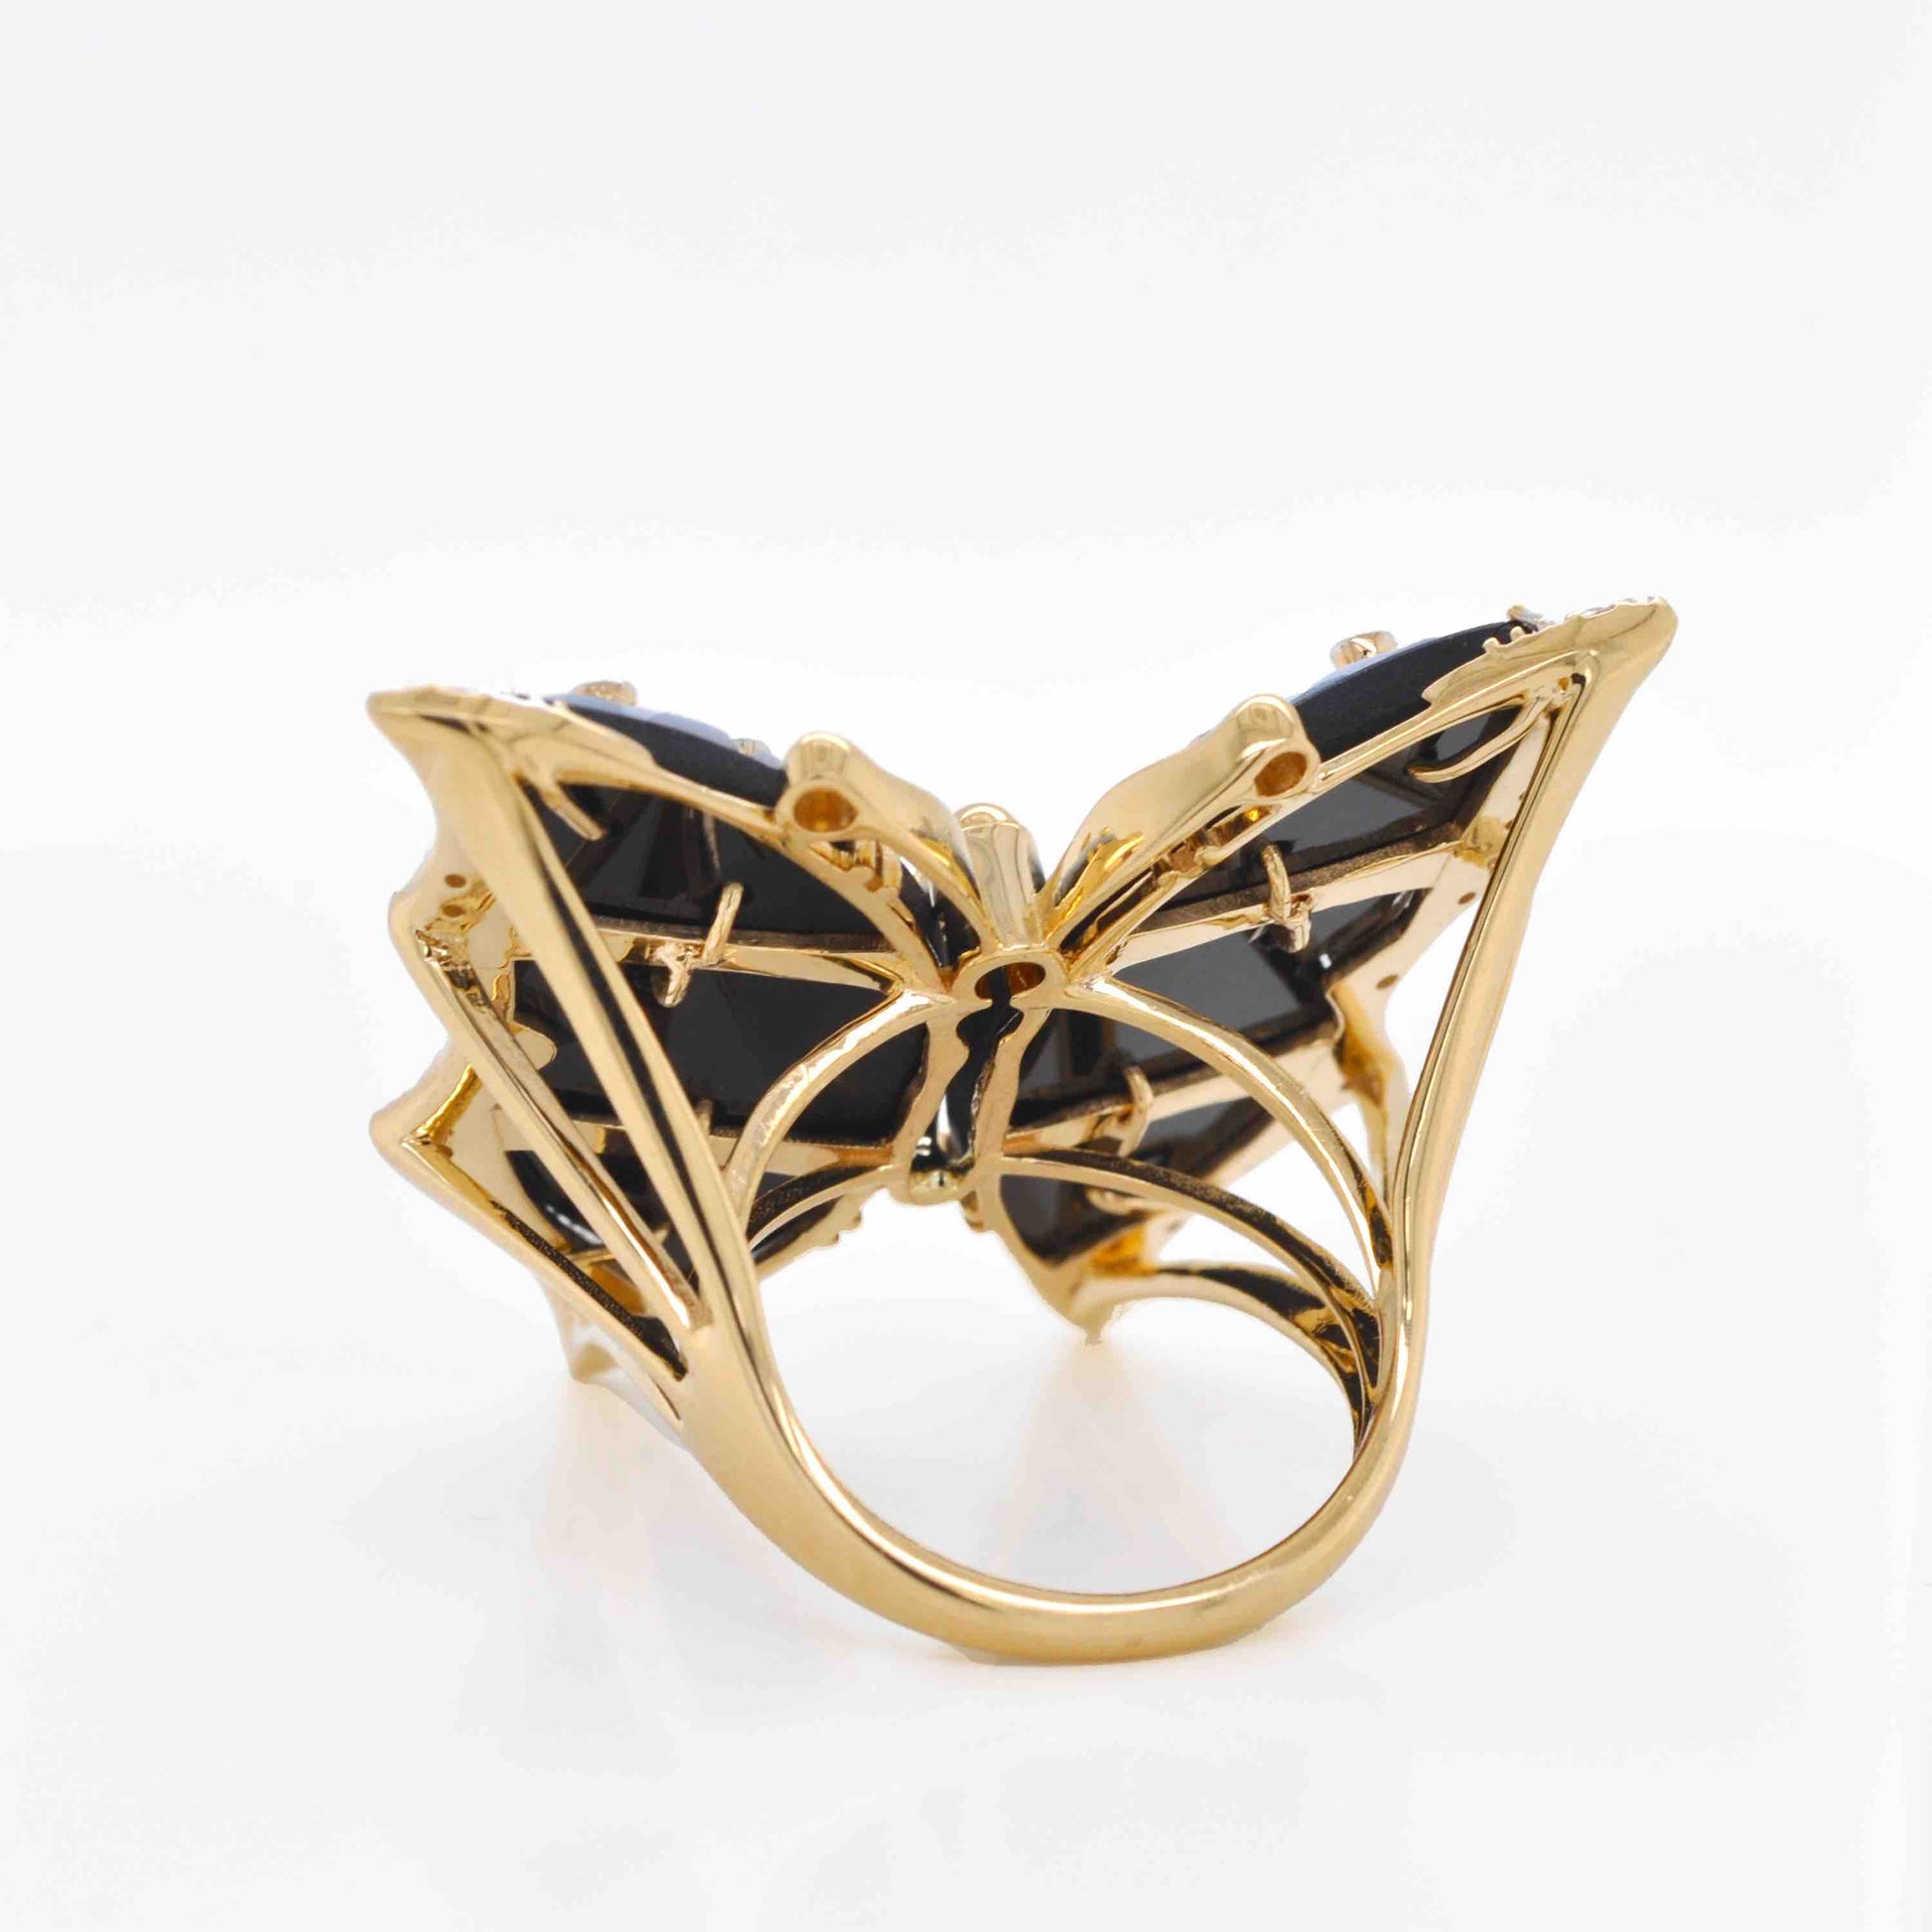 18K Gold Hand-Carved Agate Butterfly Cocktail Diamond Ring - Vaibhav Dhadda Jewelry